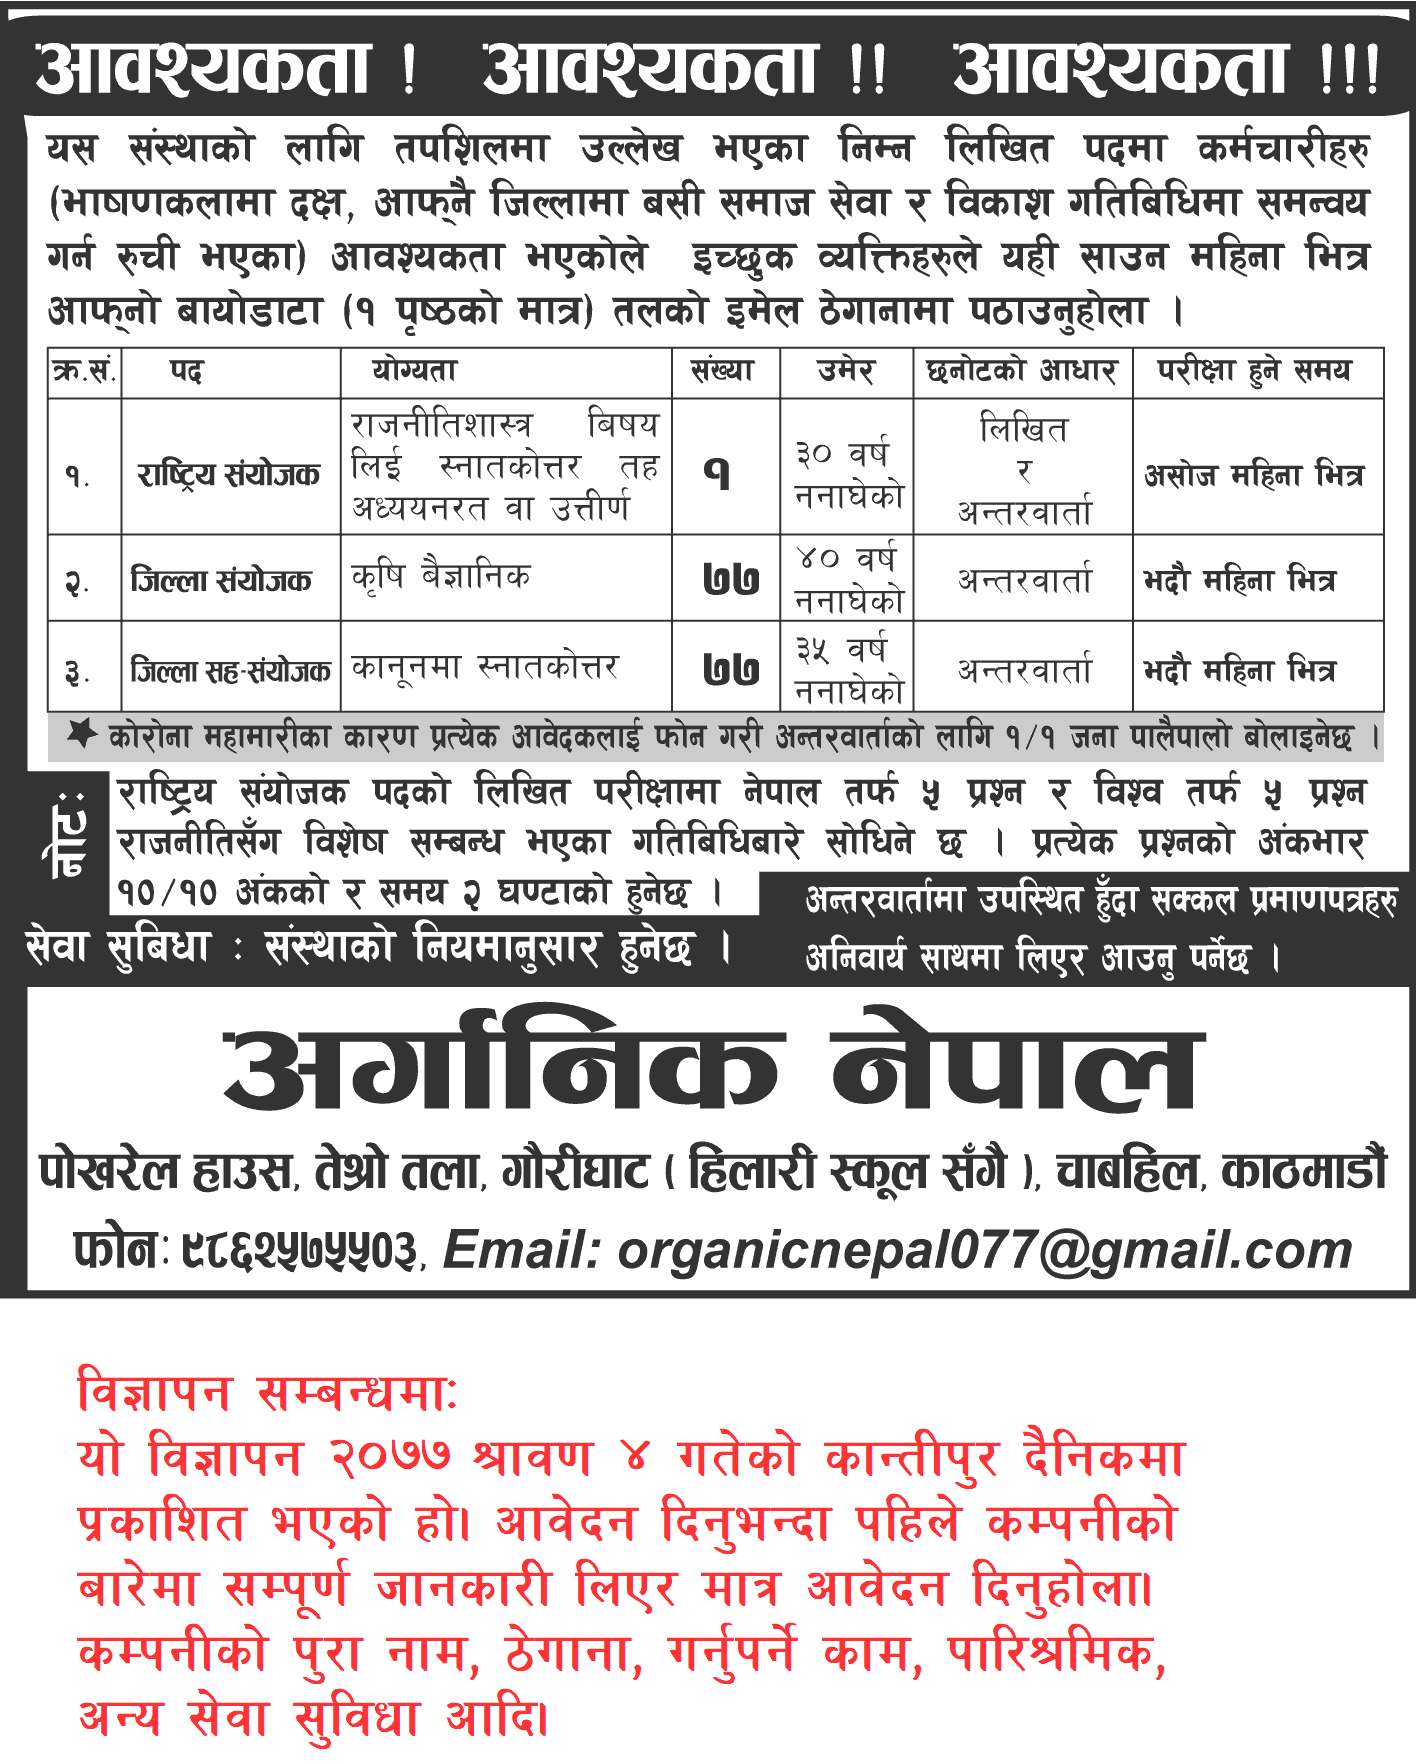 Organic Nepal Vacancy for Various Positions